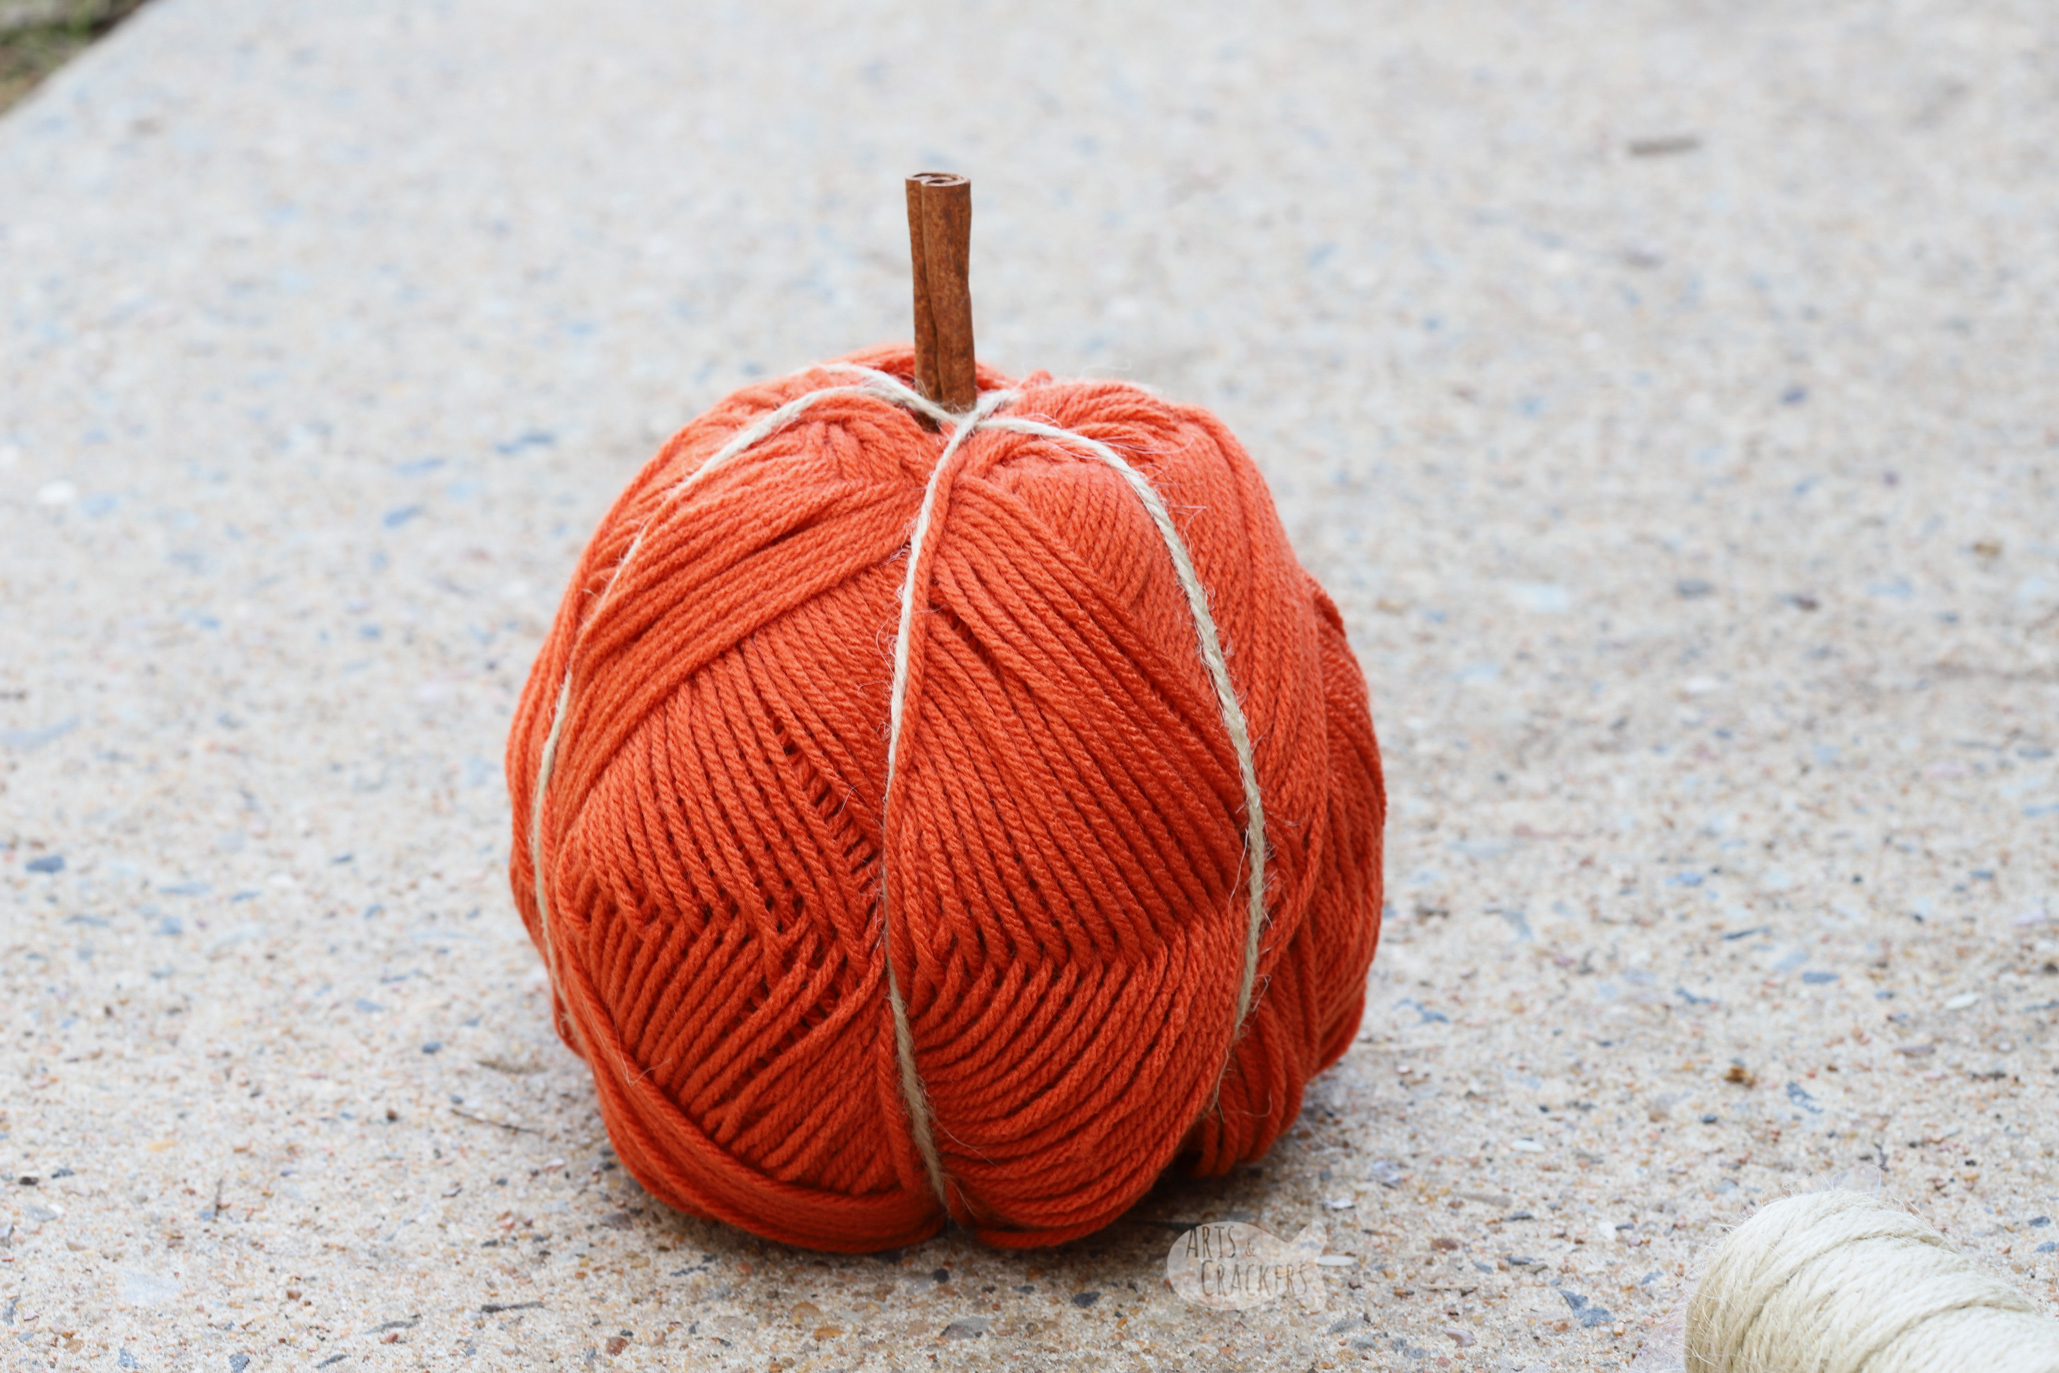 Decorate for fall with these adorable yarn pumpkins. Make this cute pumpkin decor with a yarn skein to make easy fall decorations for your home | DIY pumpkin decor | yarn skein crafts | fall crafts for the home | yarn pumpkins | no sew | yarn crafts for fall | fall home decorating | easy fall crafts | fall mantel | #yarncrafts #craftyfingers #autumncrafts #homedecor #pumpkins #yarn #DIYblogger